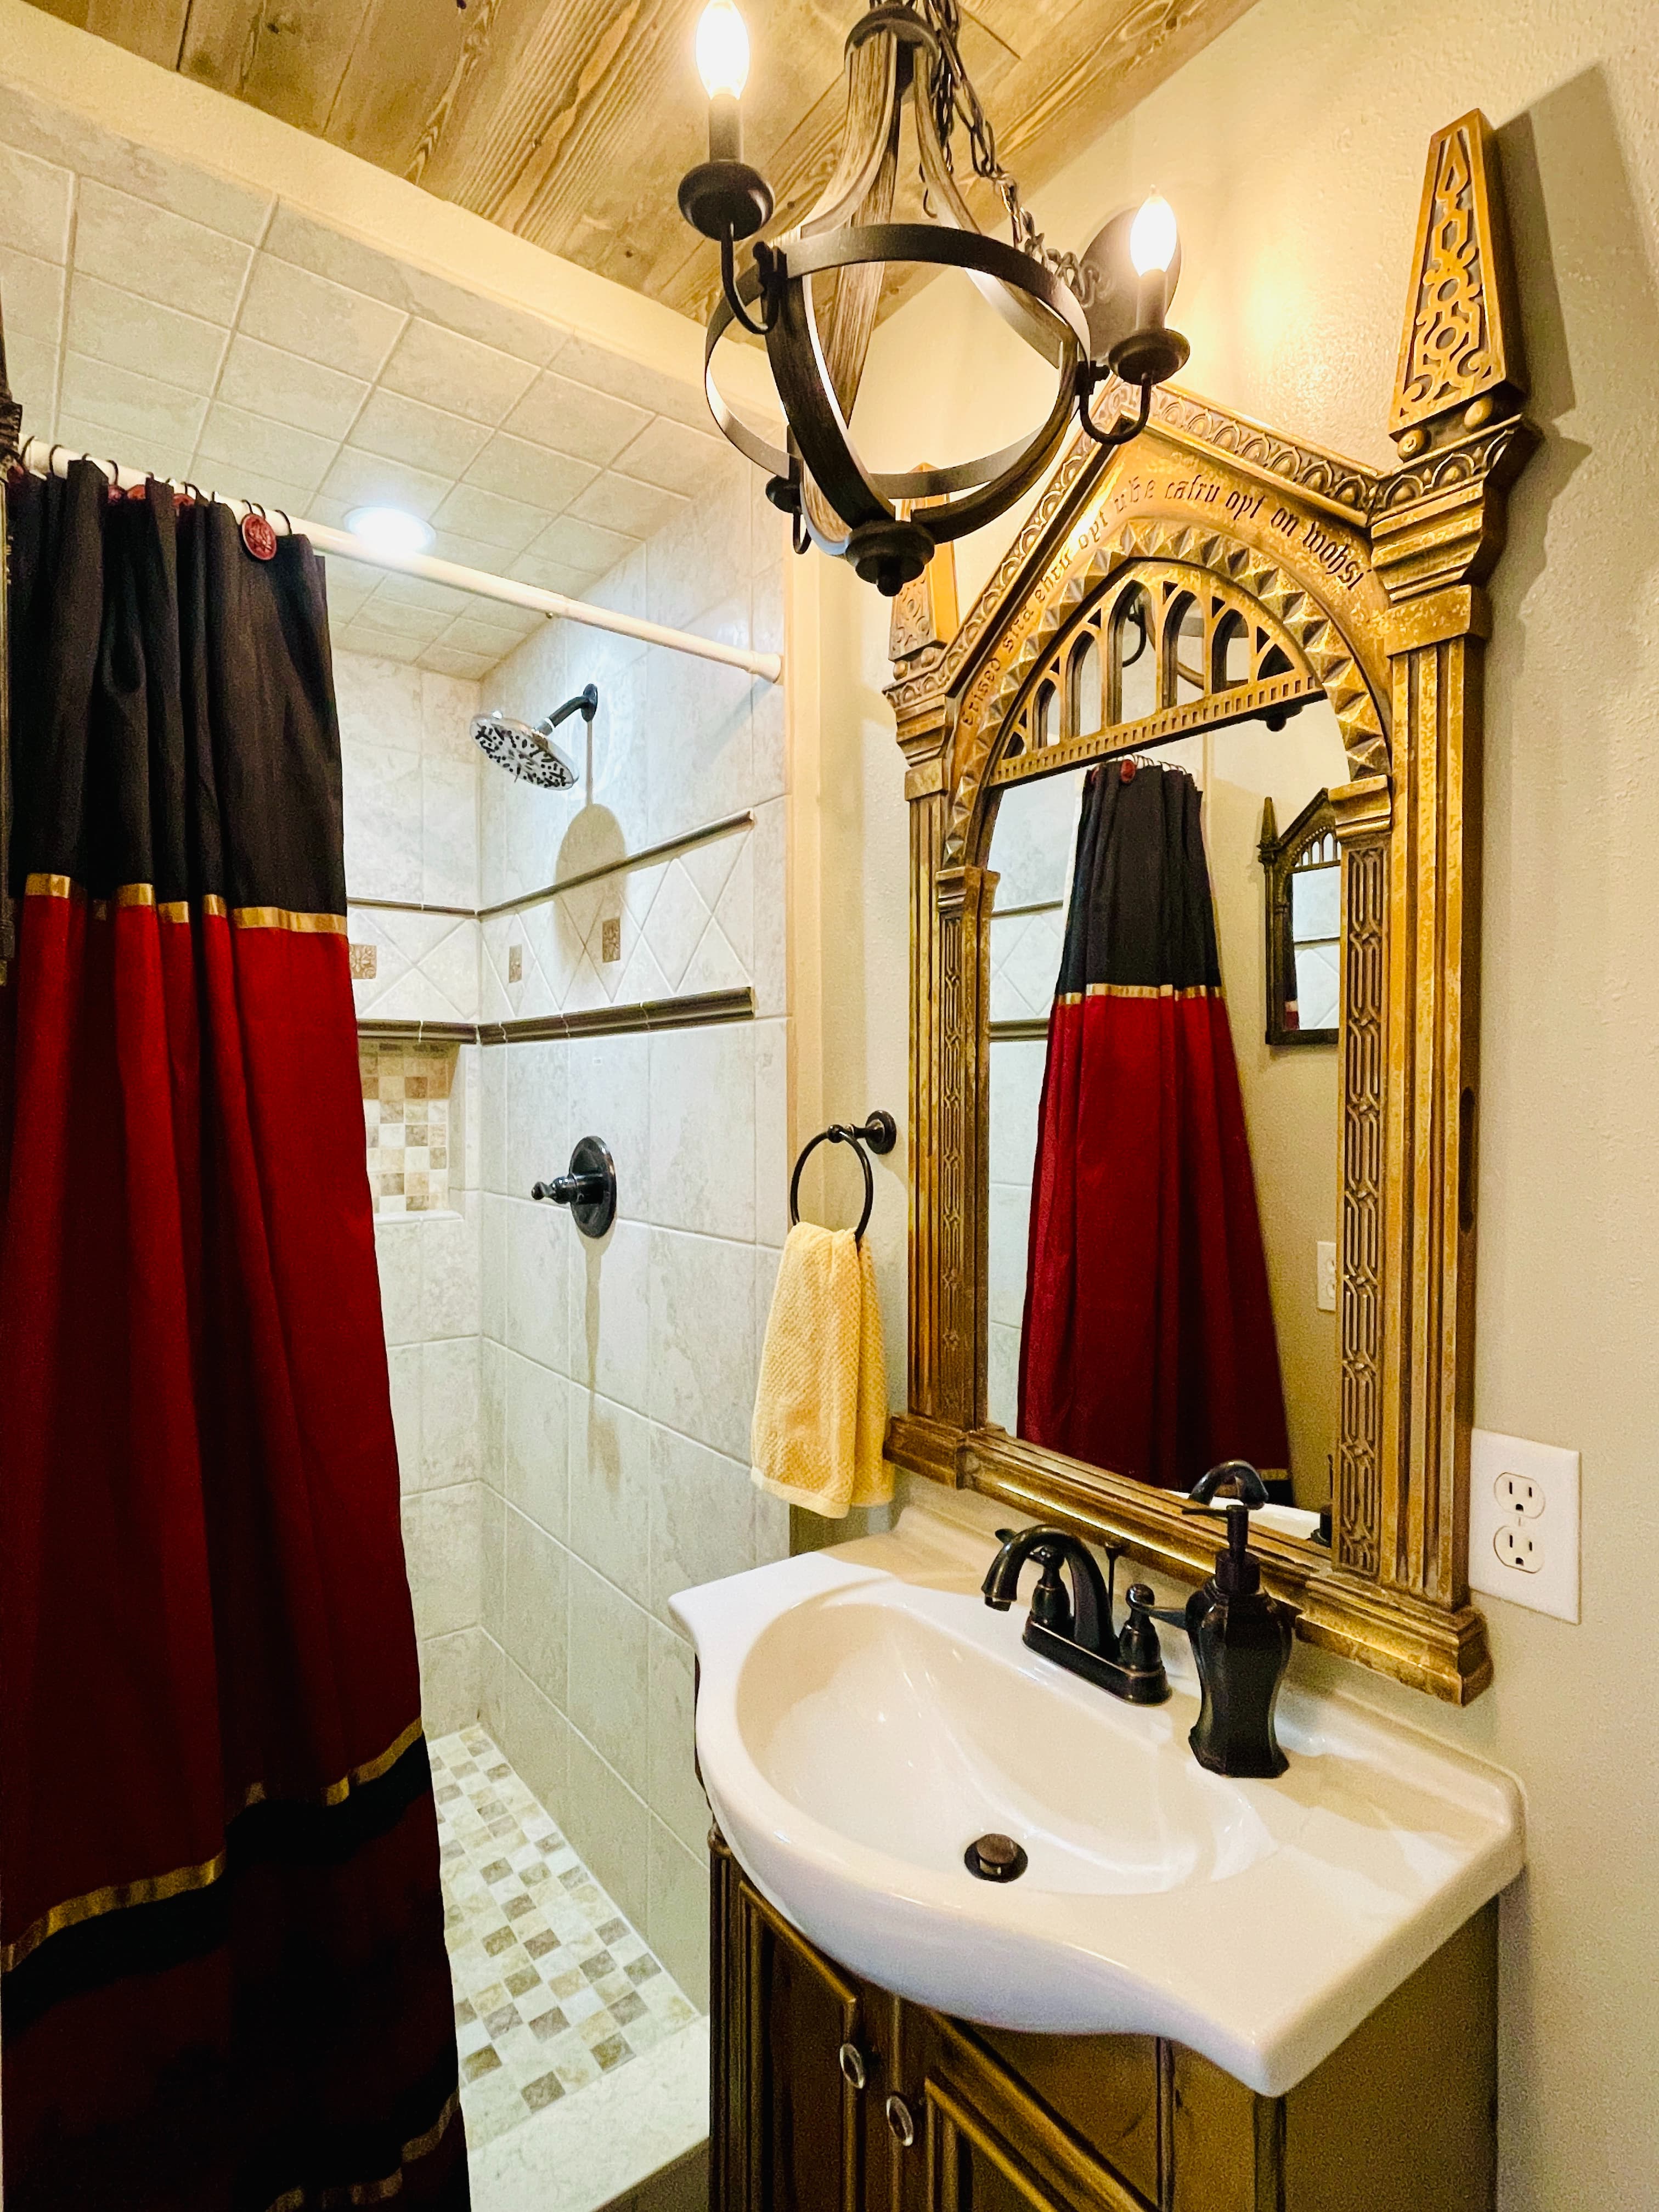 Nearby, the HARRY POTTER Gryffindor bathroom has a stand-up shower.